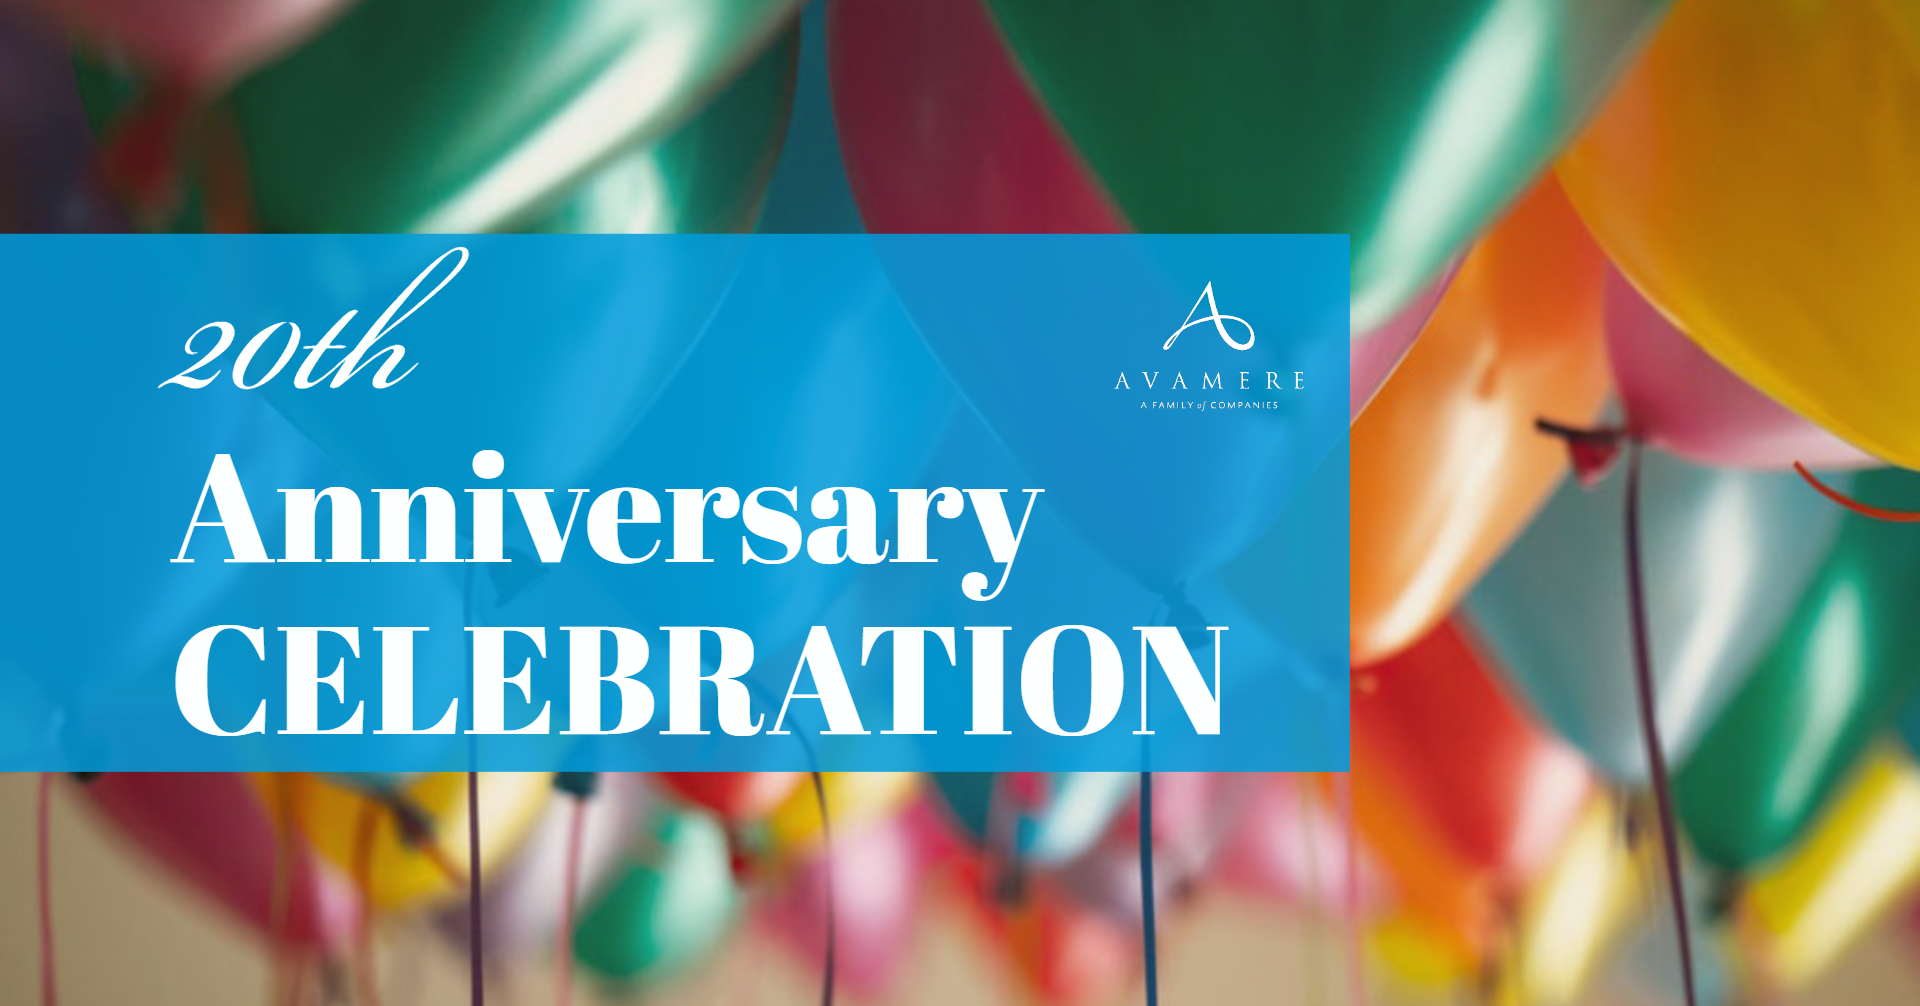 Avamere at St. Helens Celebrates 20 Years Enhancing Lives | Newswire